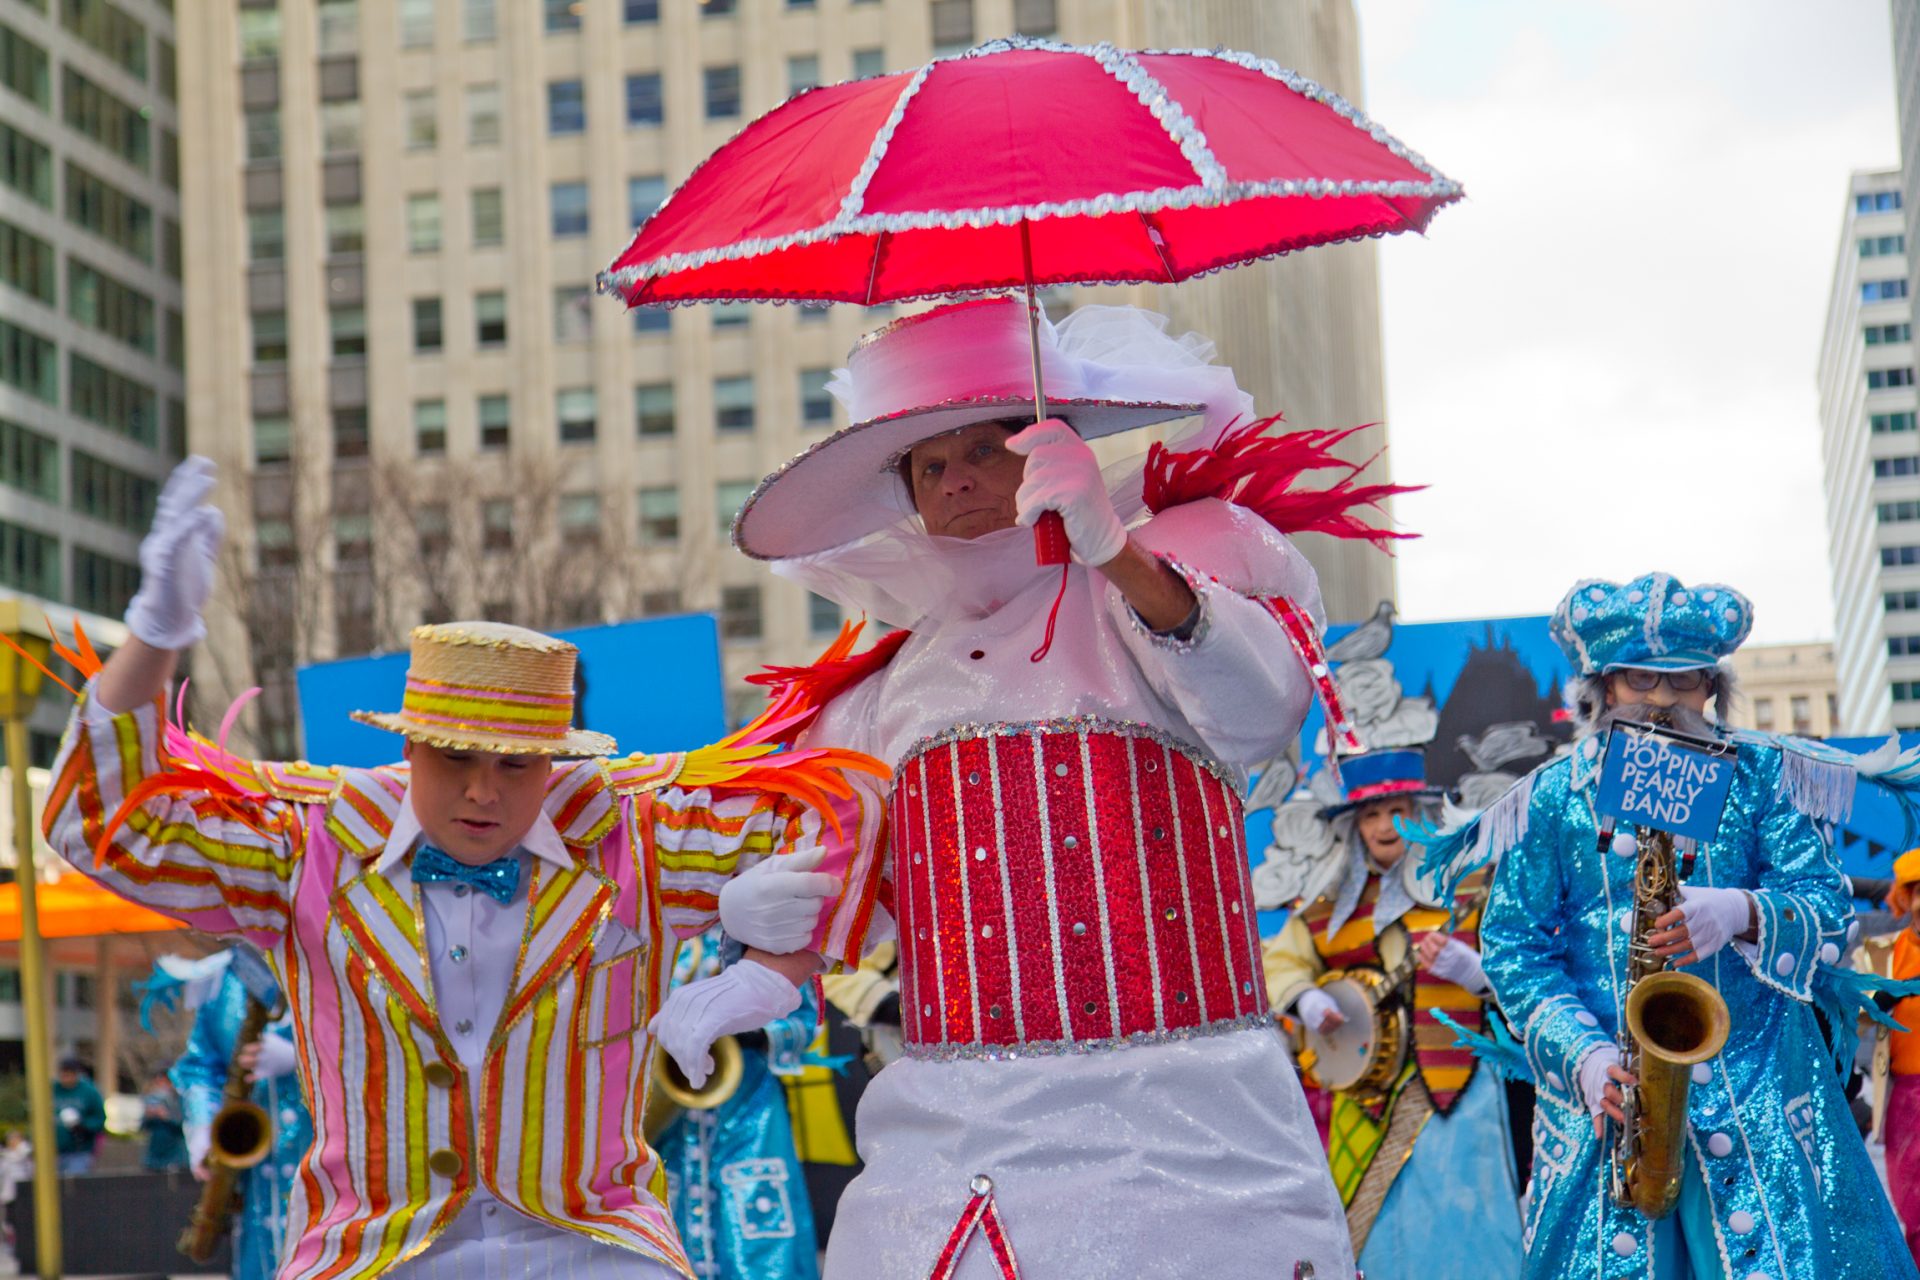 Jimmy Driadon, captain of the Greater Overbook String Band celebrate’s his 70th parade dressed up as Mary Poppins.